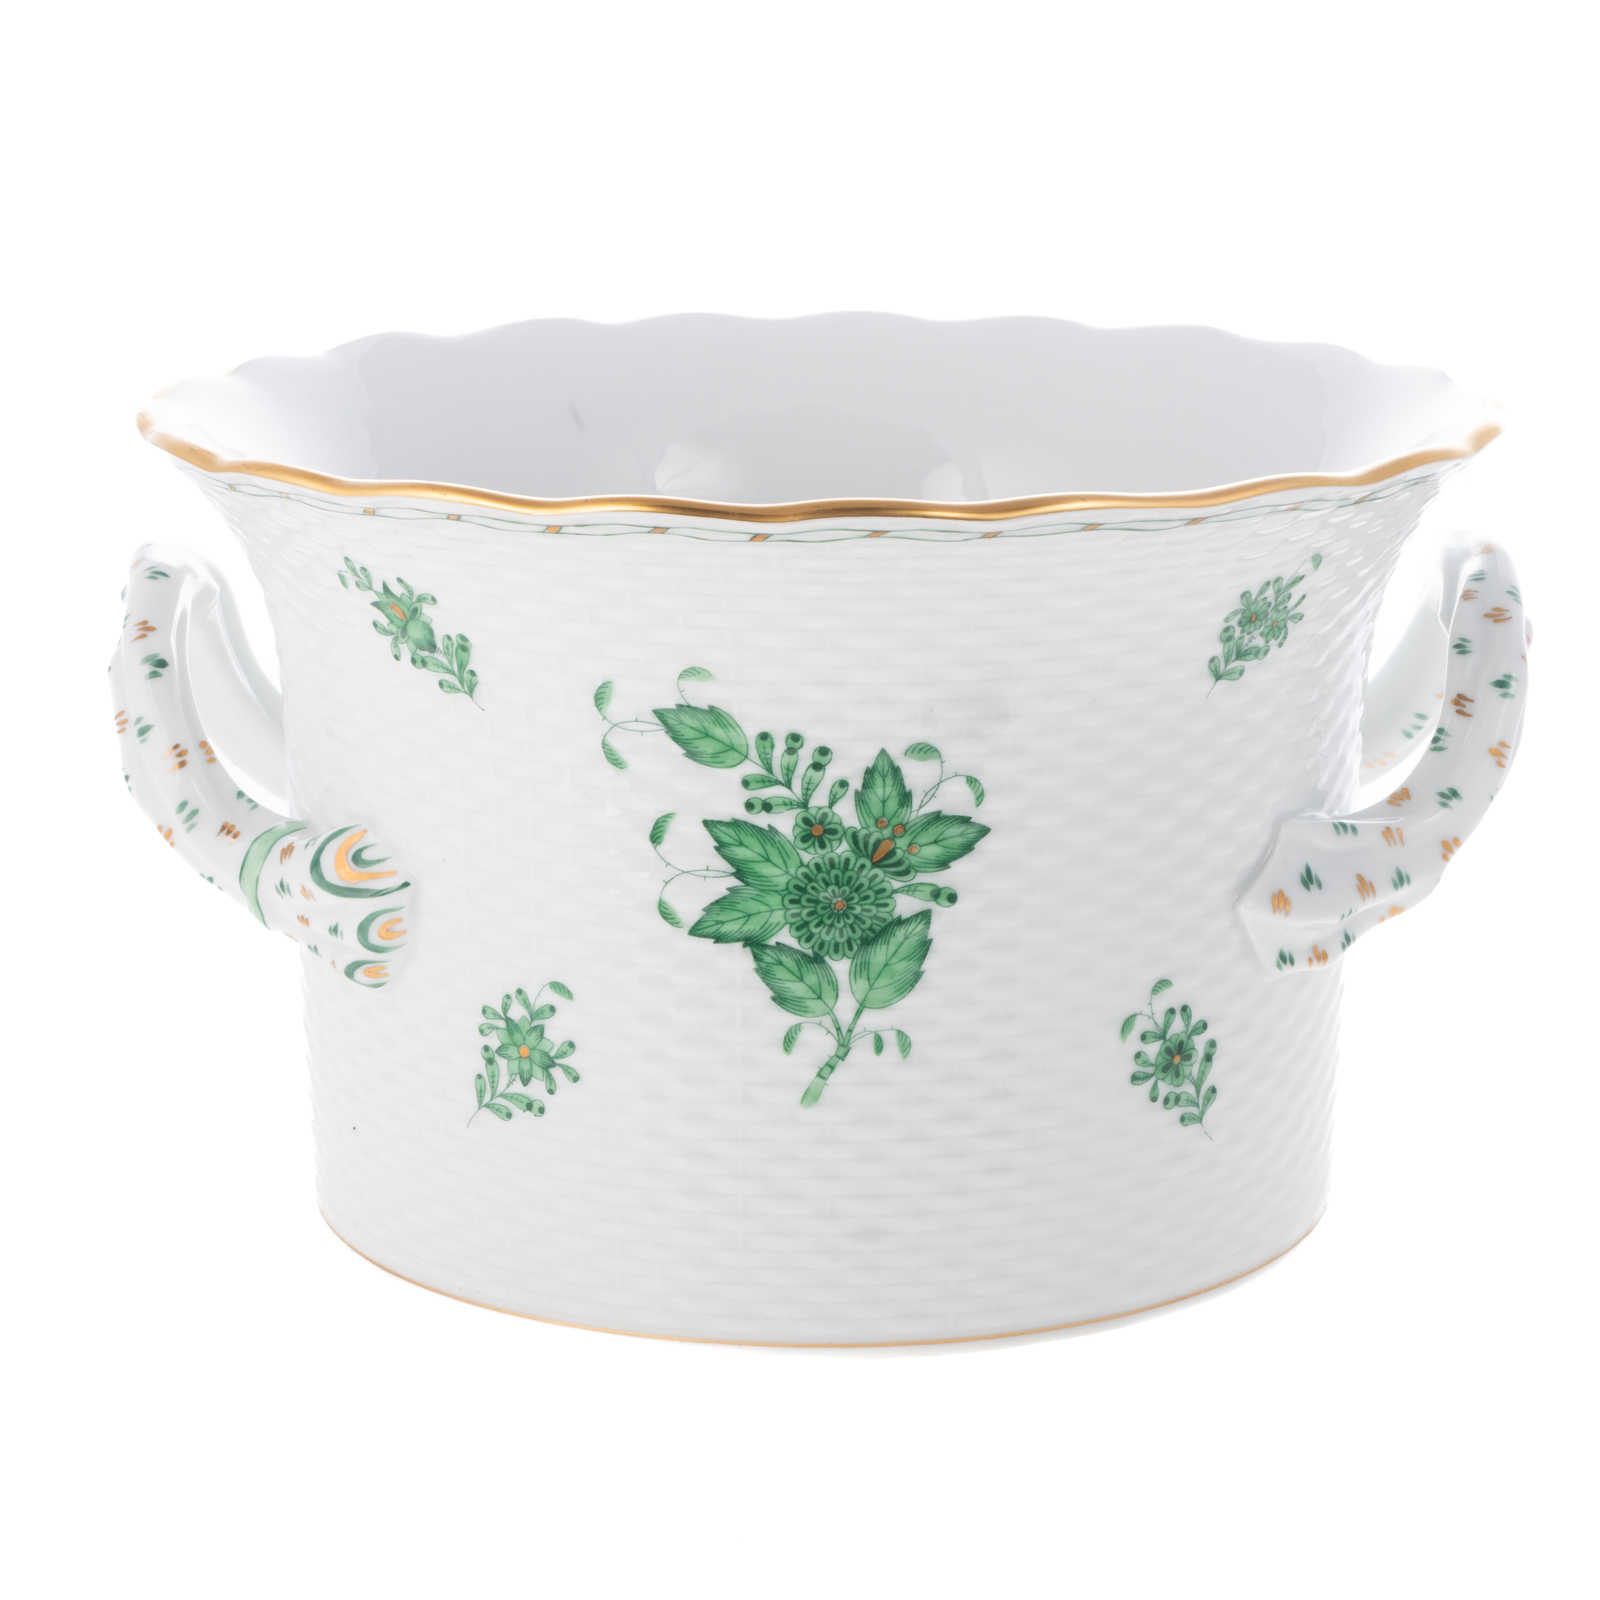 HEREND PORCELAIN CACHE POT In the 3698c5